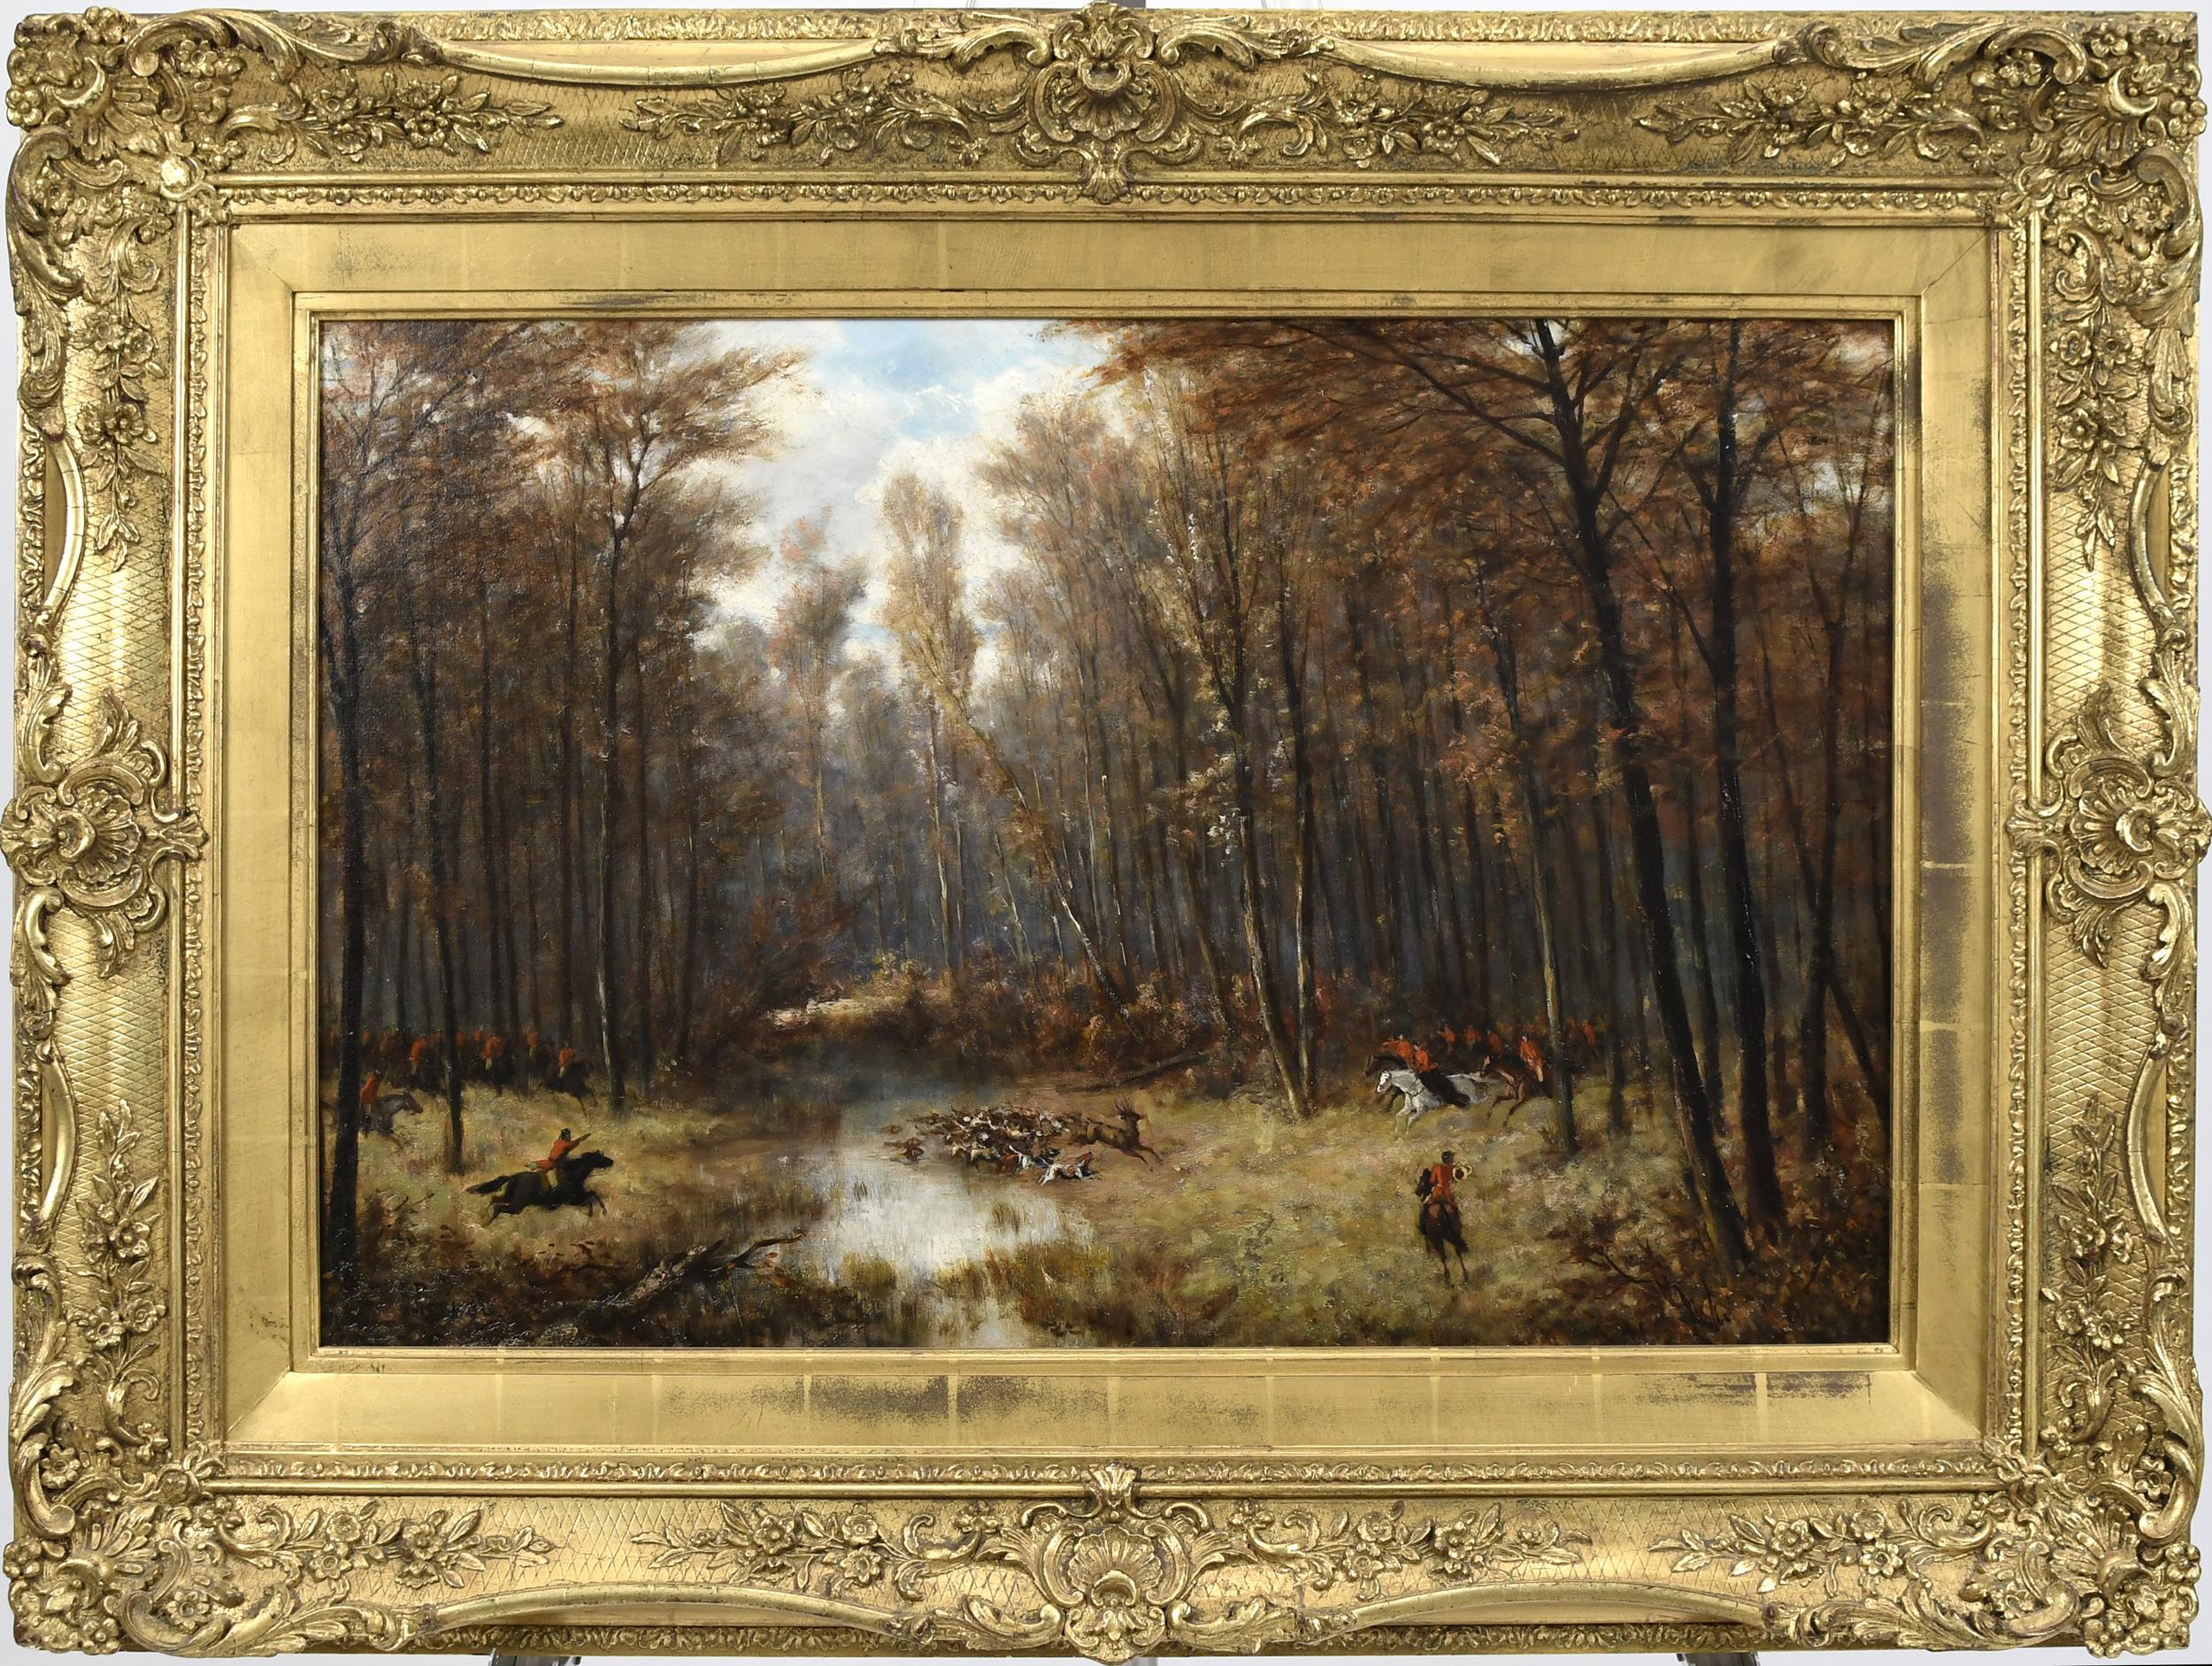 J. PREVOT STAG HUNTING OIL ON CANVAS.